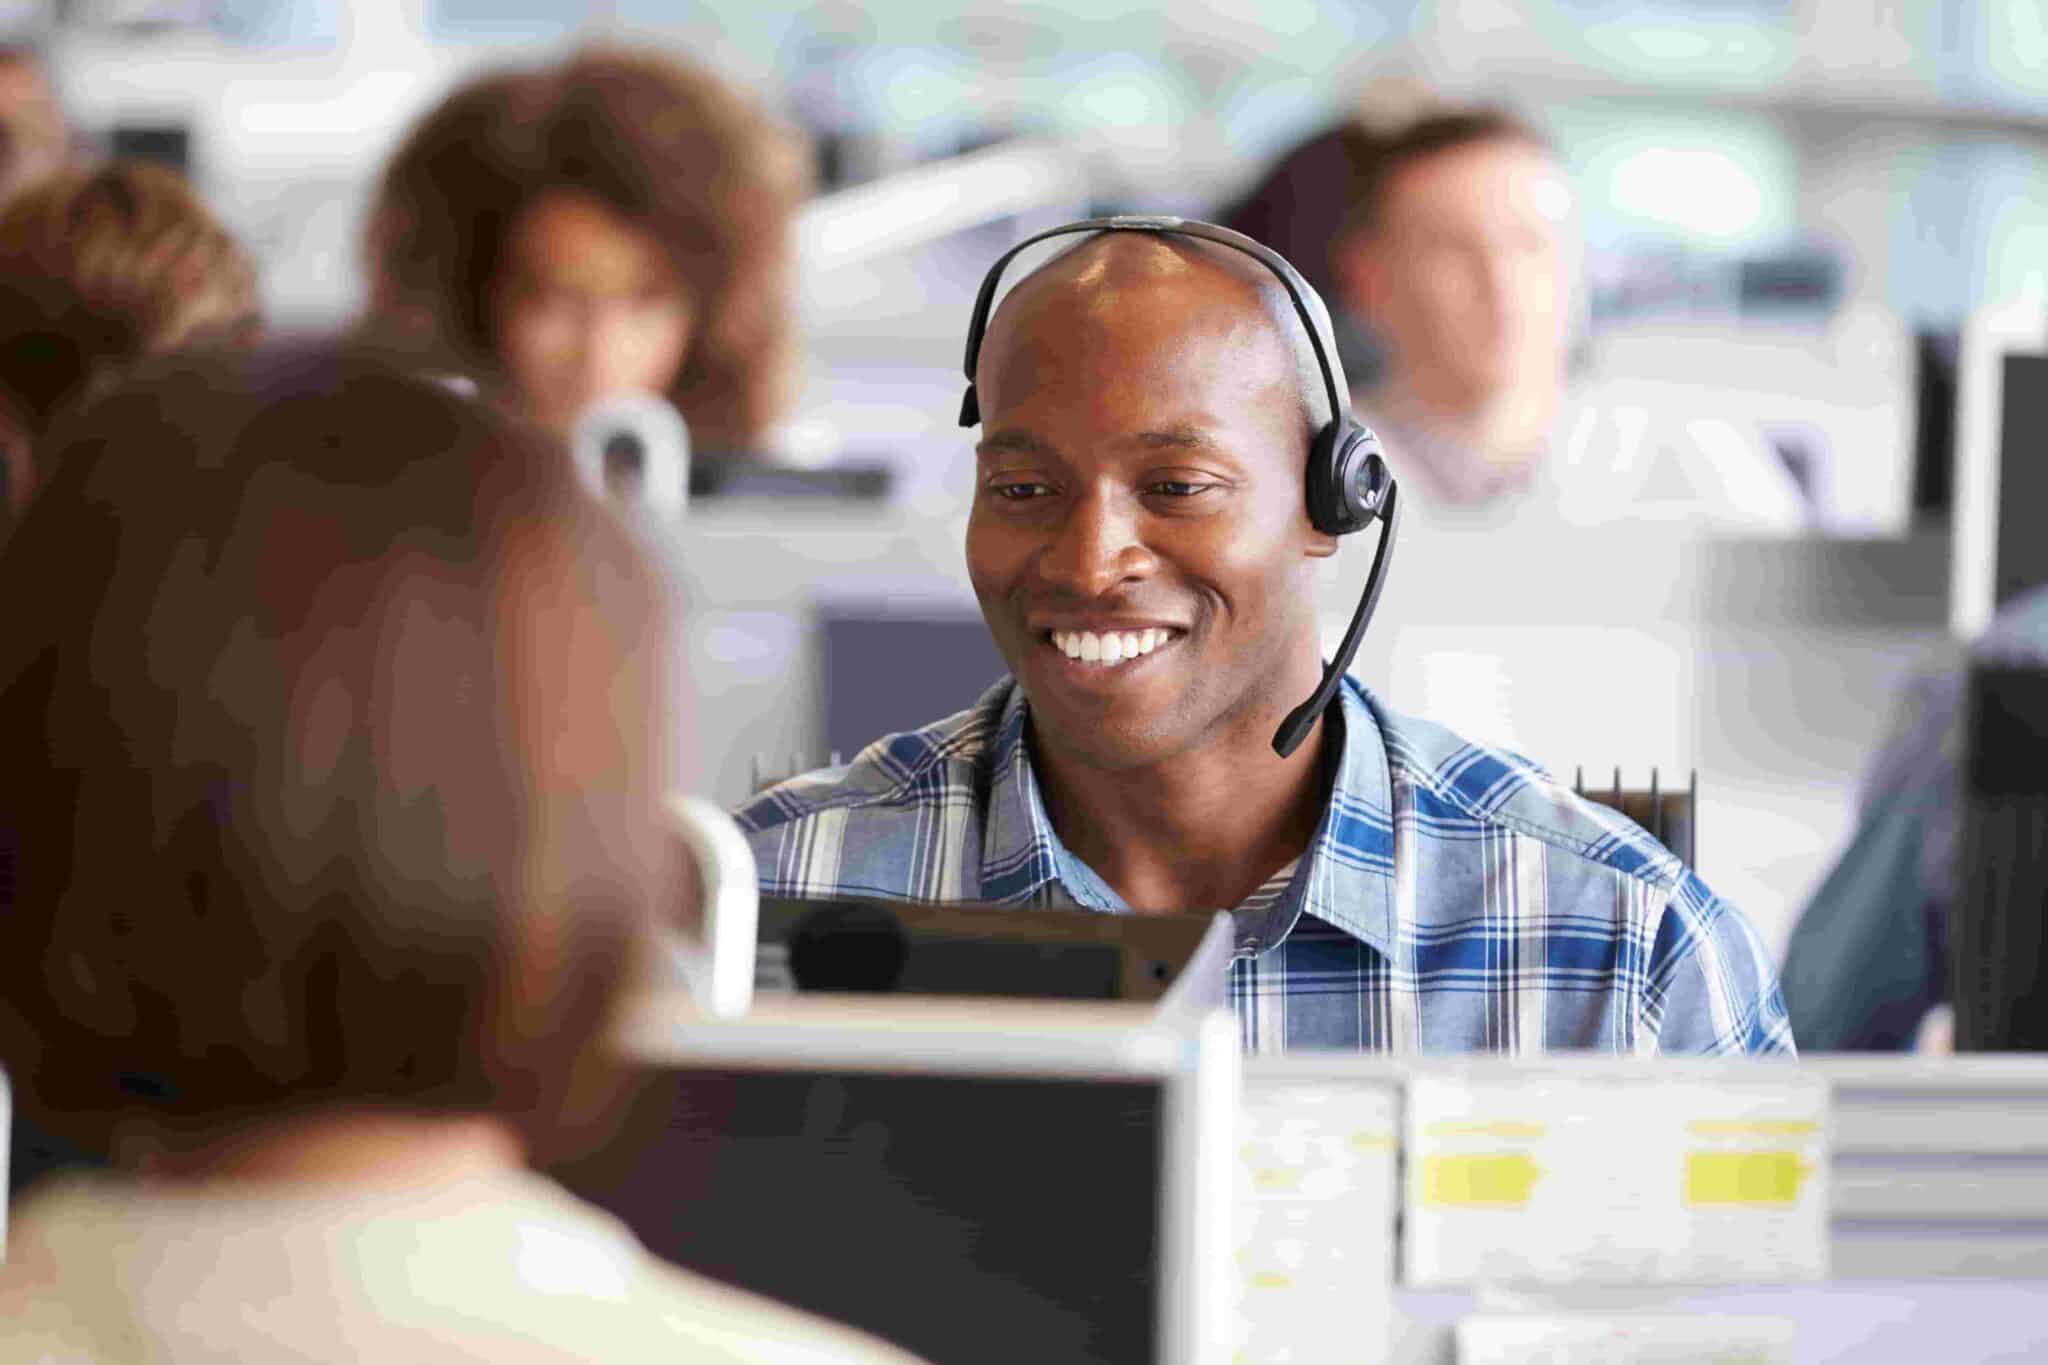 Man with headset on call